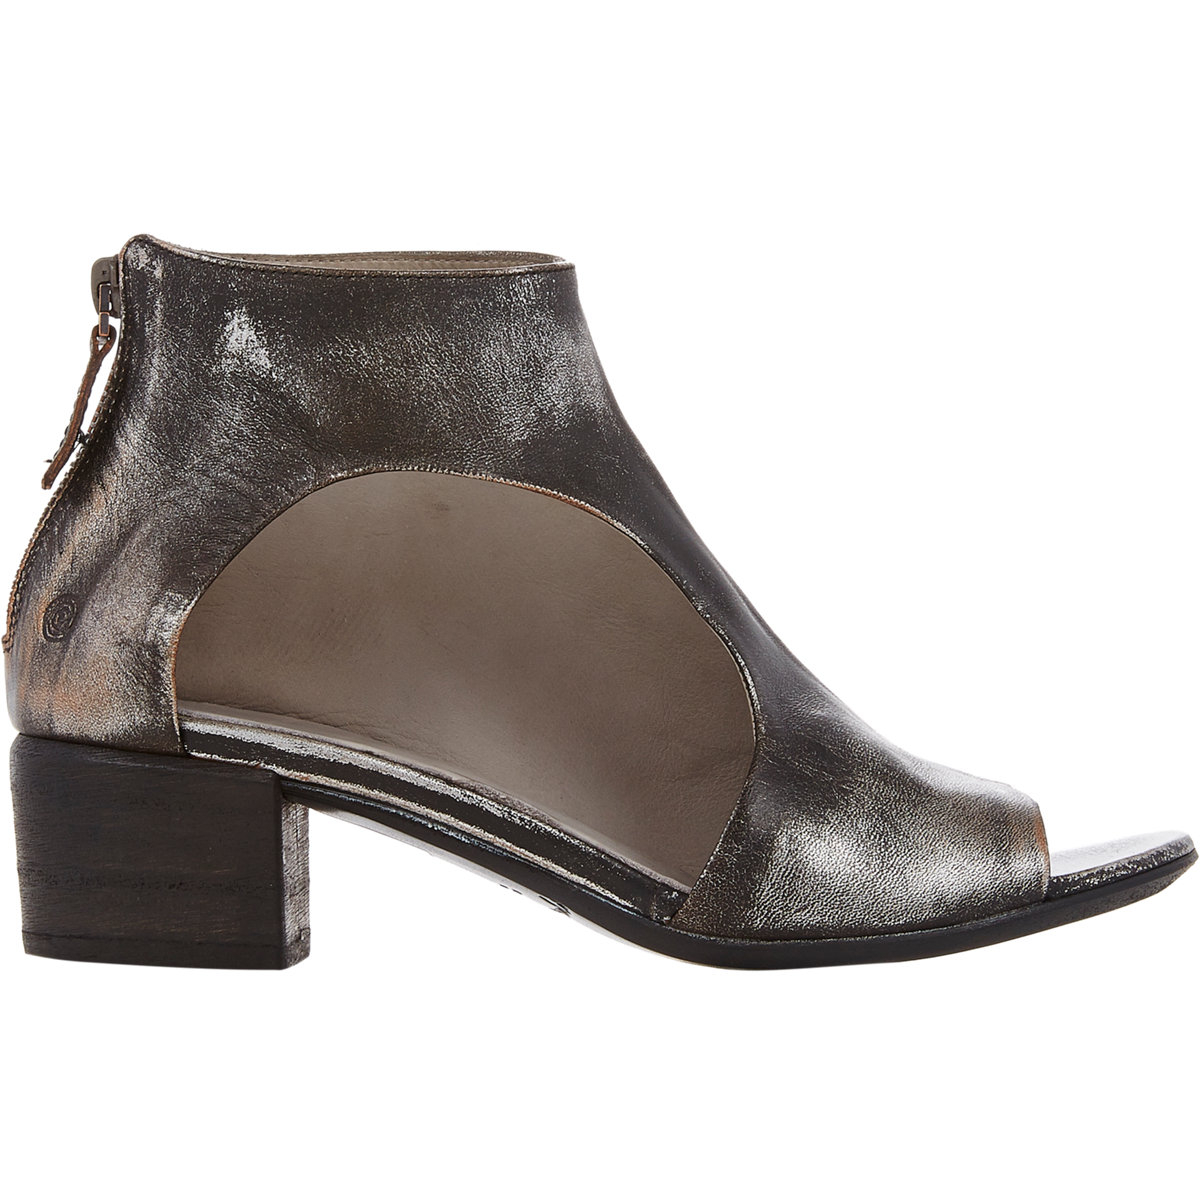 Marsèll Cutout Open-toe Ankle Boots in Gray (DARK GREY) | Lyst